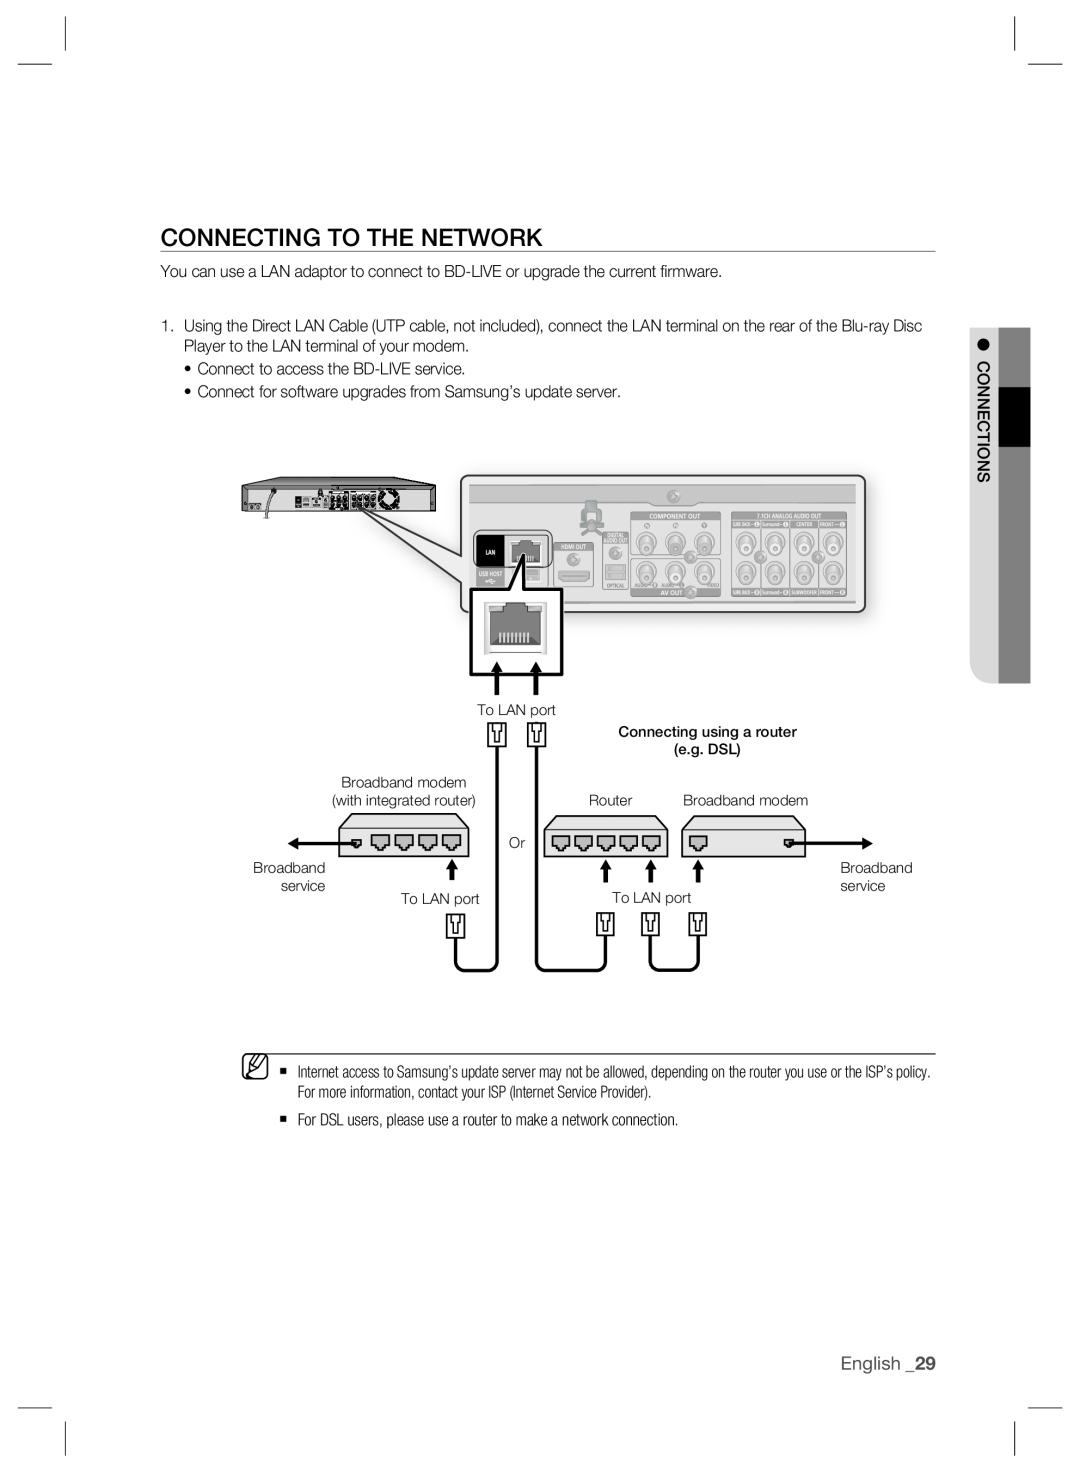 Samsung BD-P2500/XEE, BD-P2500/EDC manual Connecting To The Network, English, Broadband modem, with integrated router 